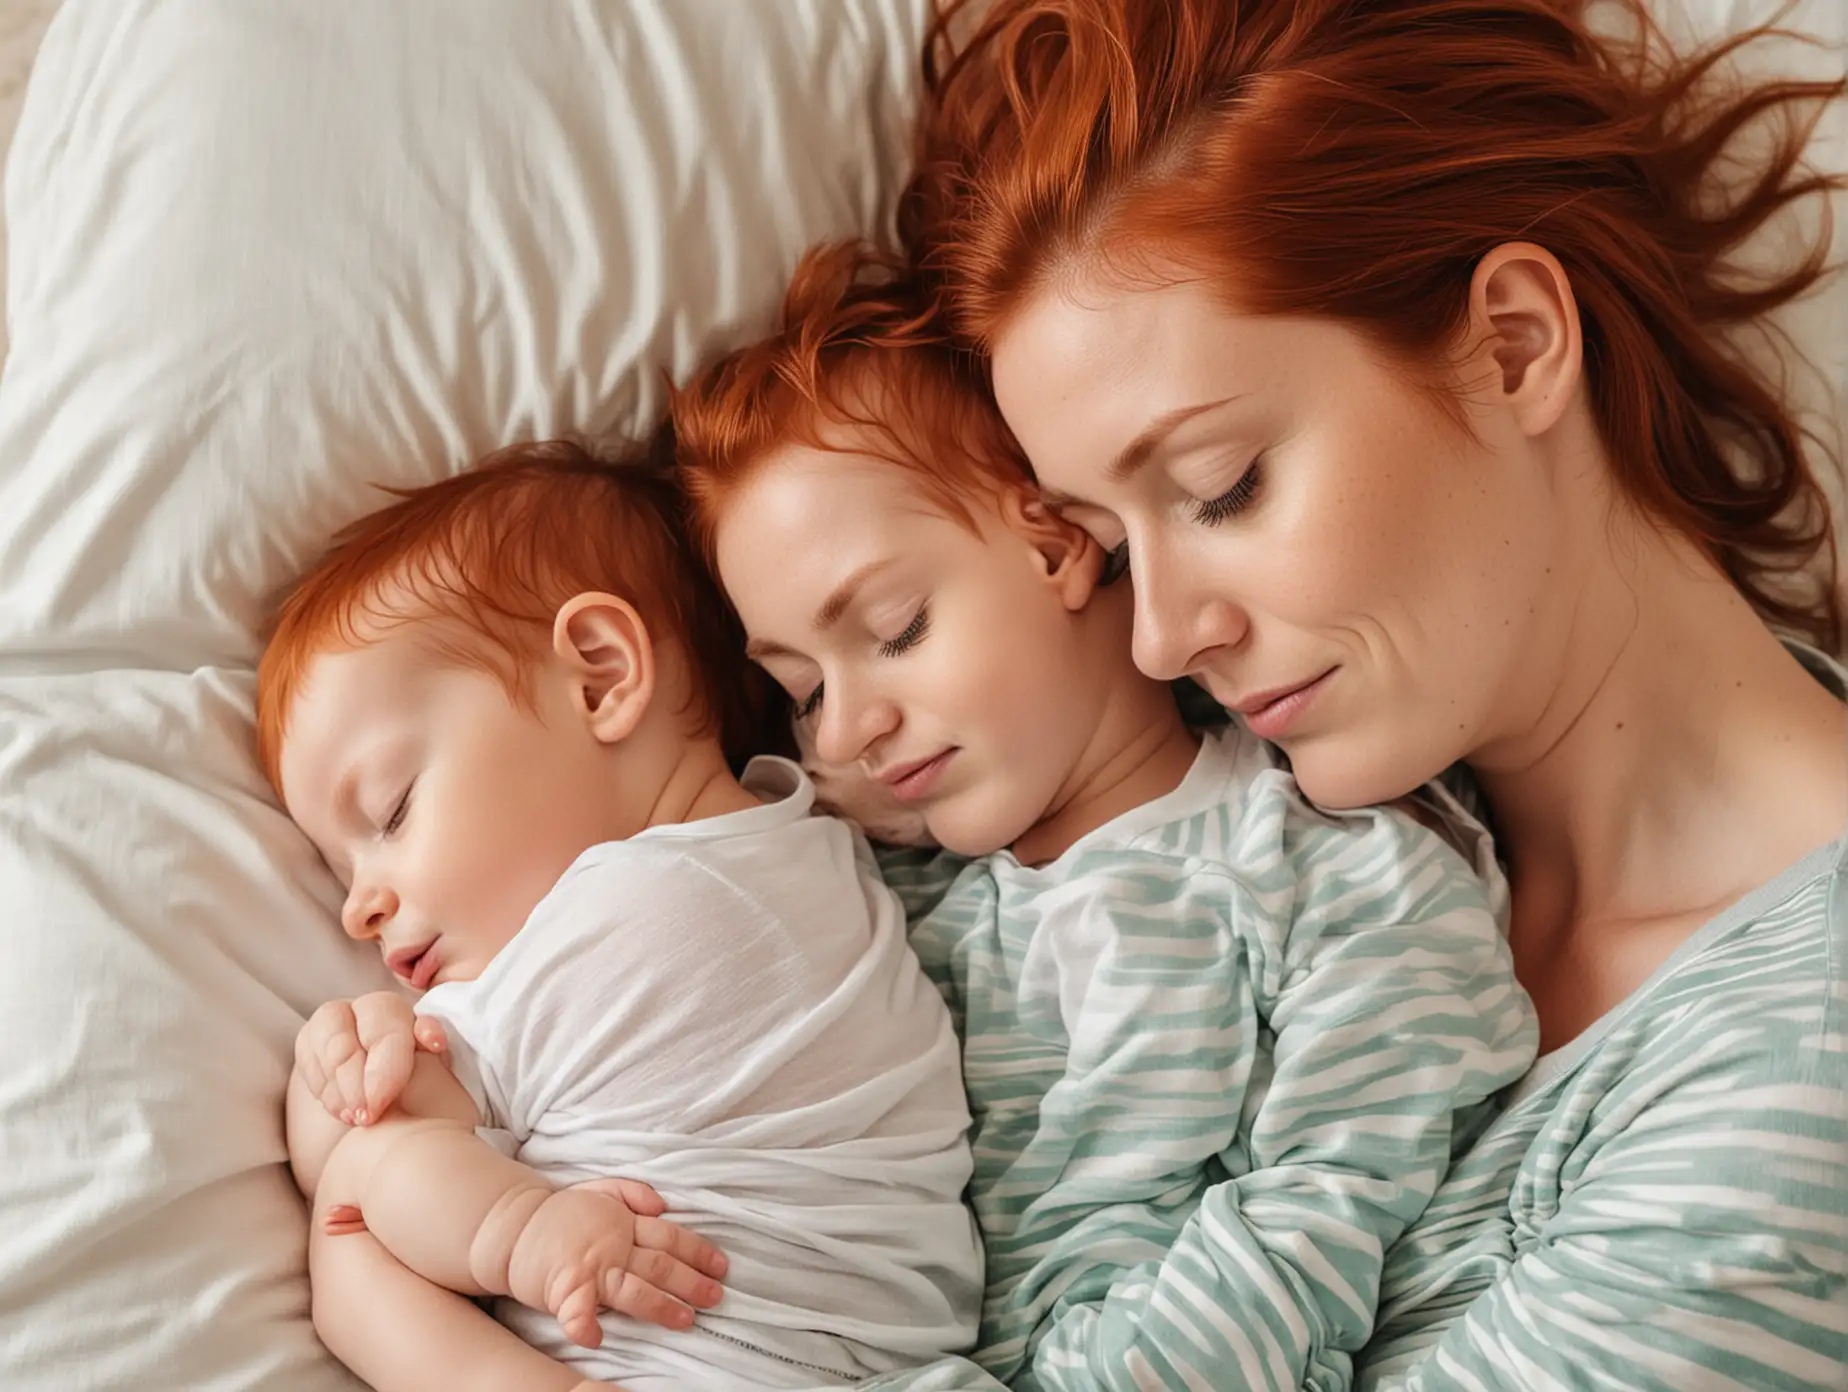 RedHaired Mother with Baby and Sleeping Toddler